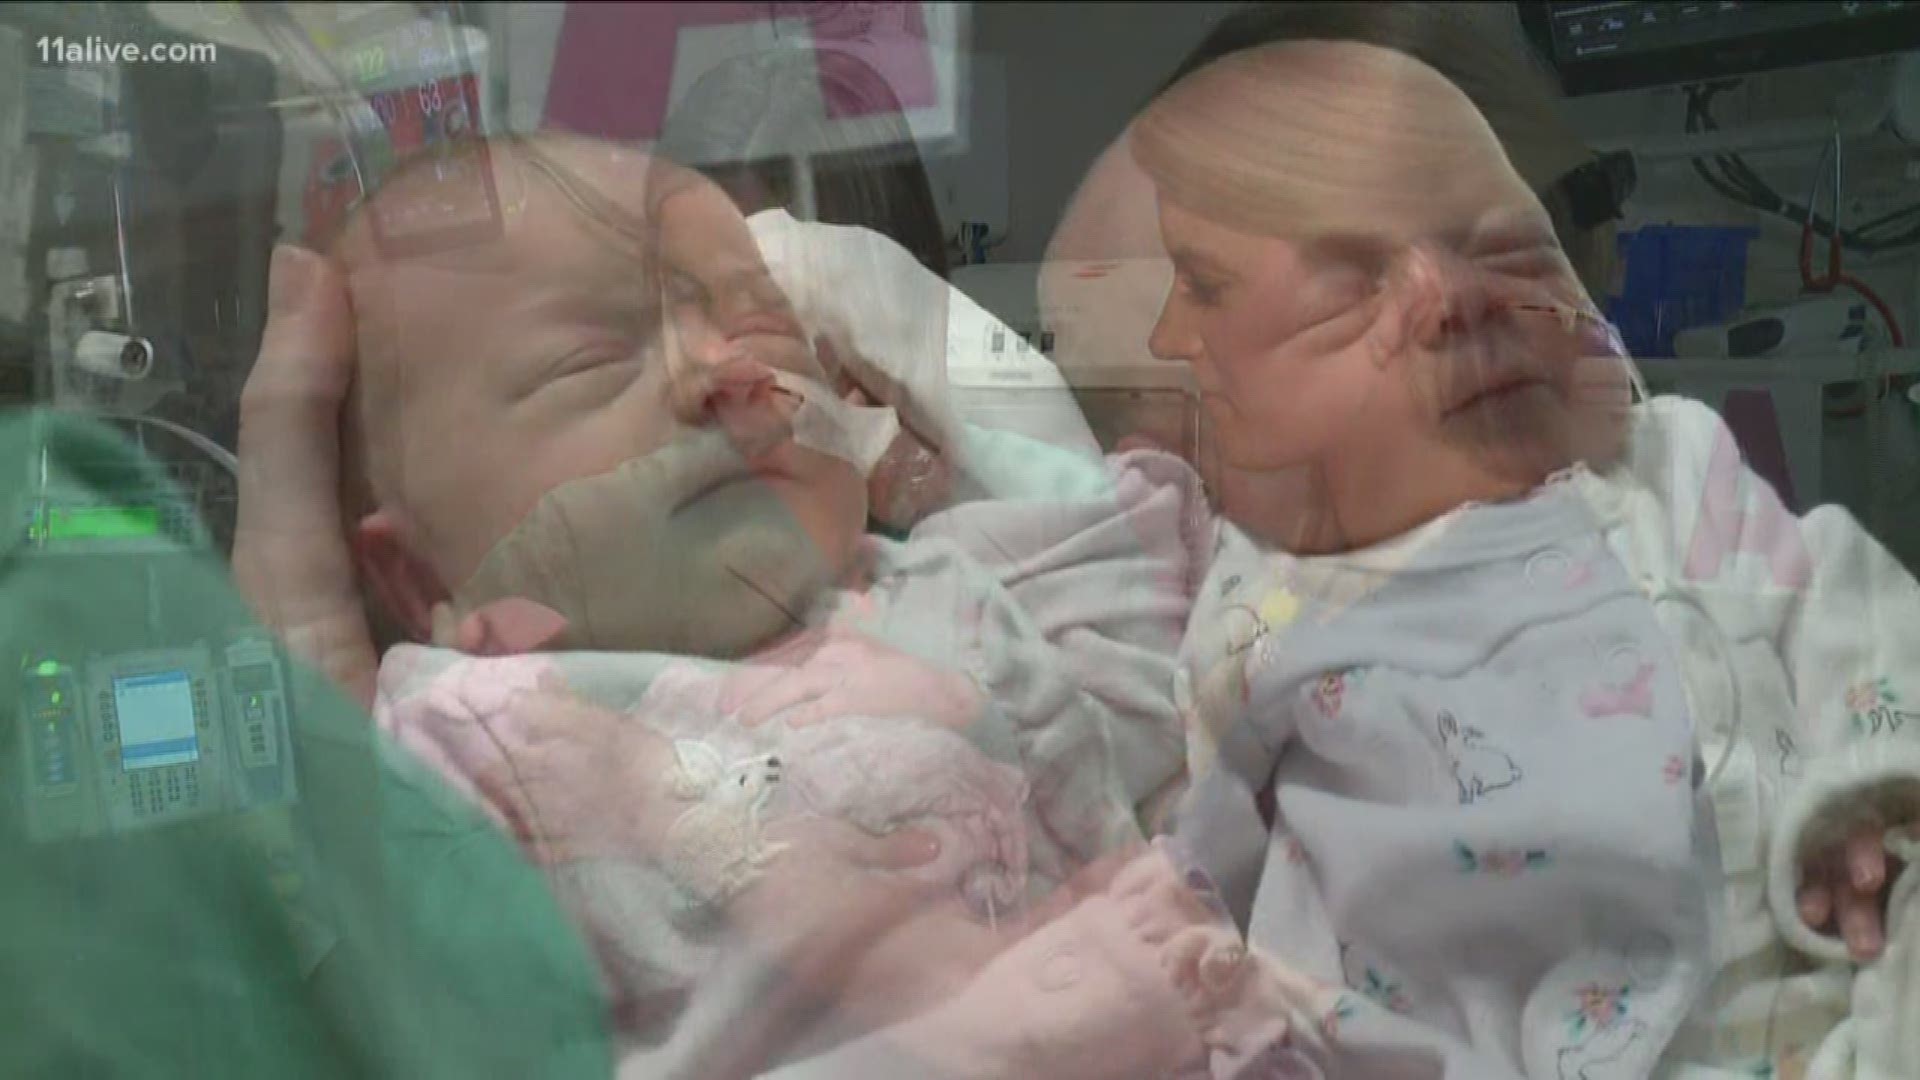 For the first time, the twin sisters got to be in the delivery room as a mom gave birth to identical twin girls.